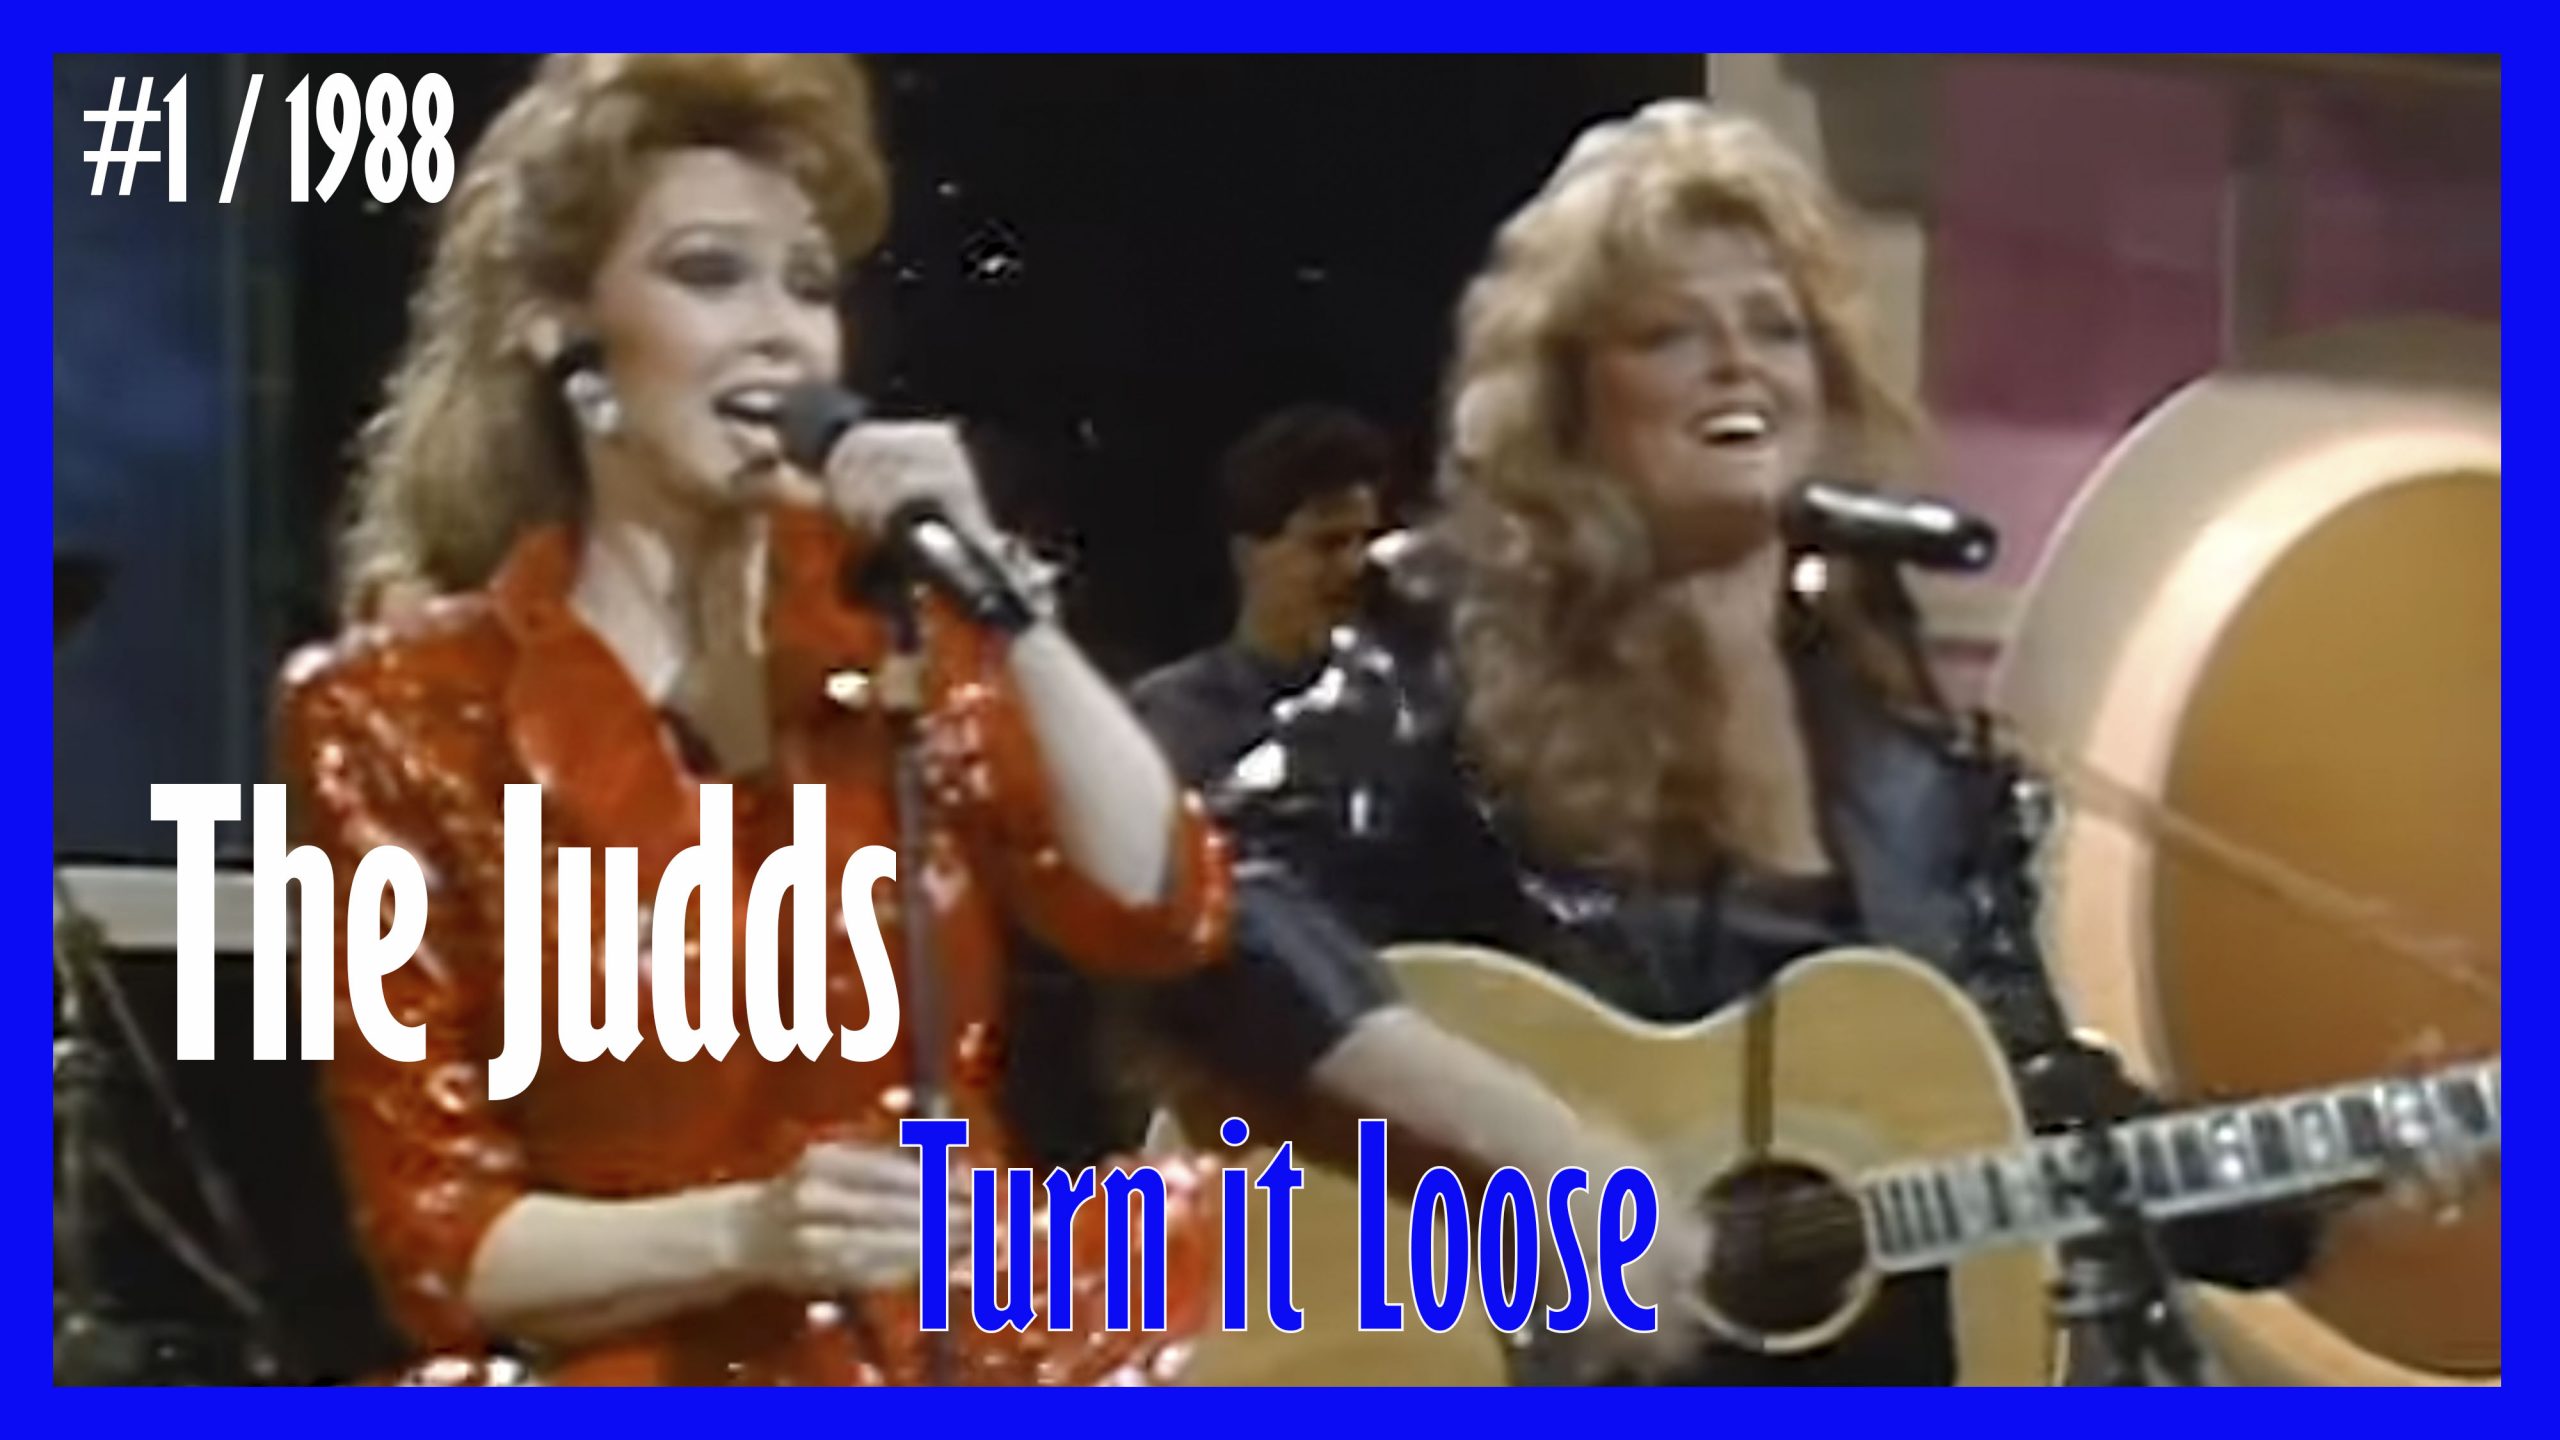 The Judds Turn it Loose